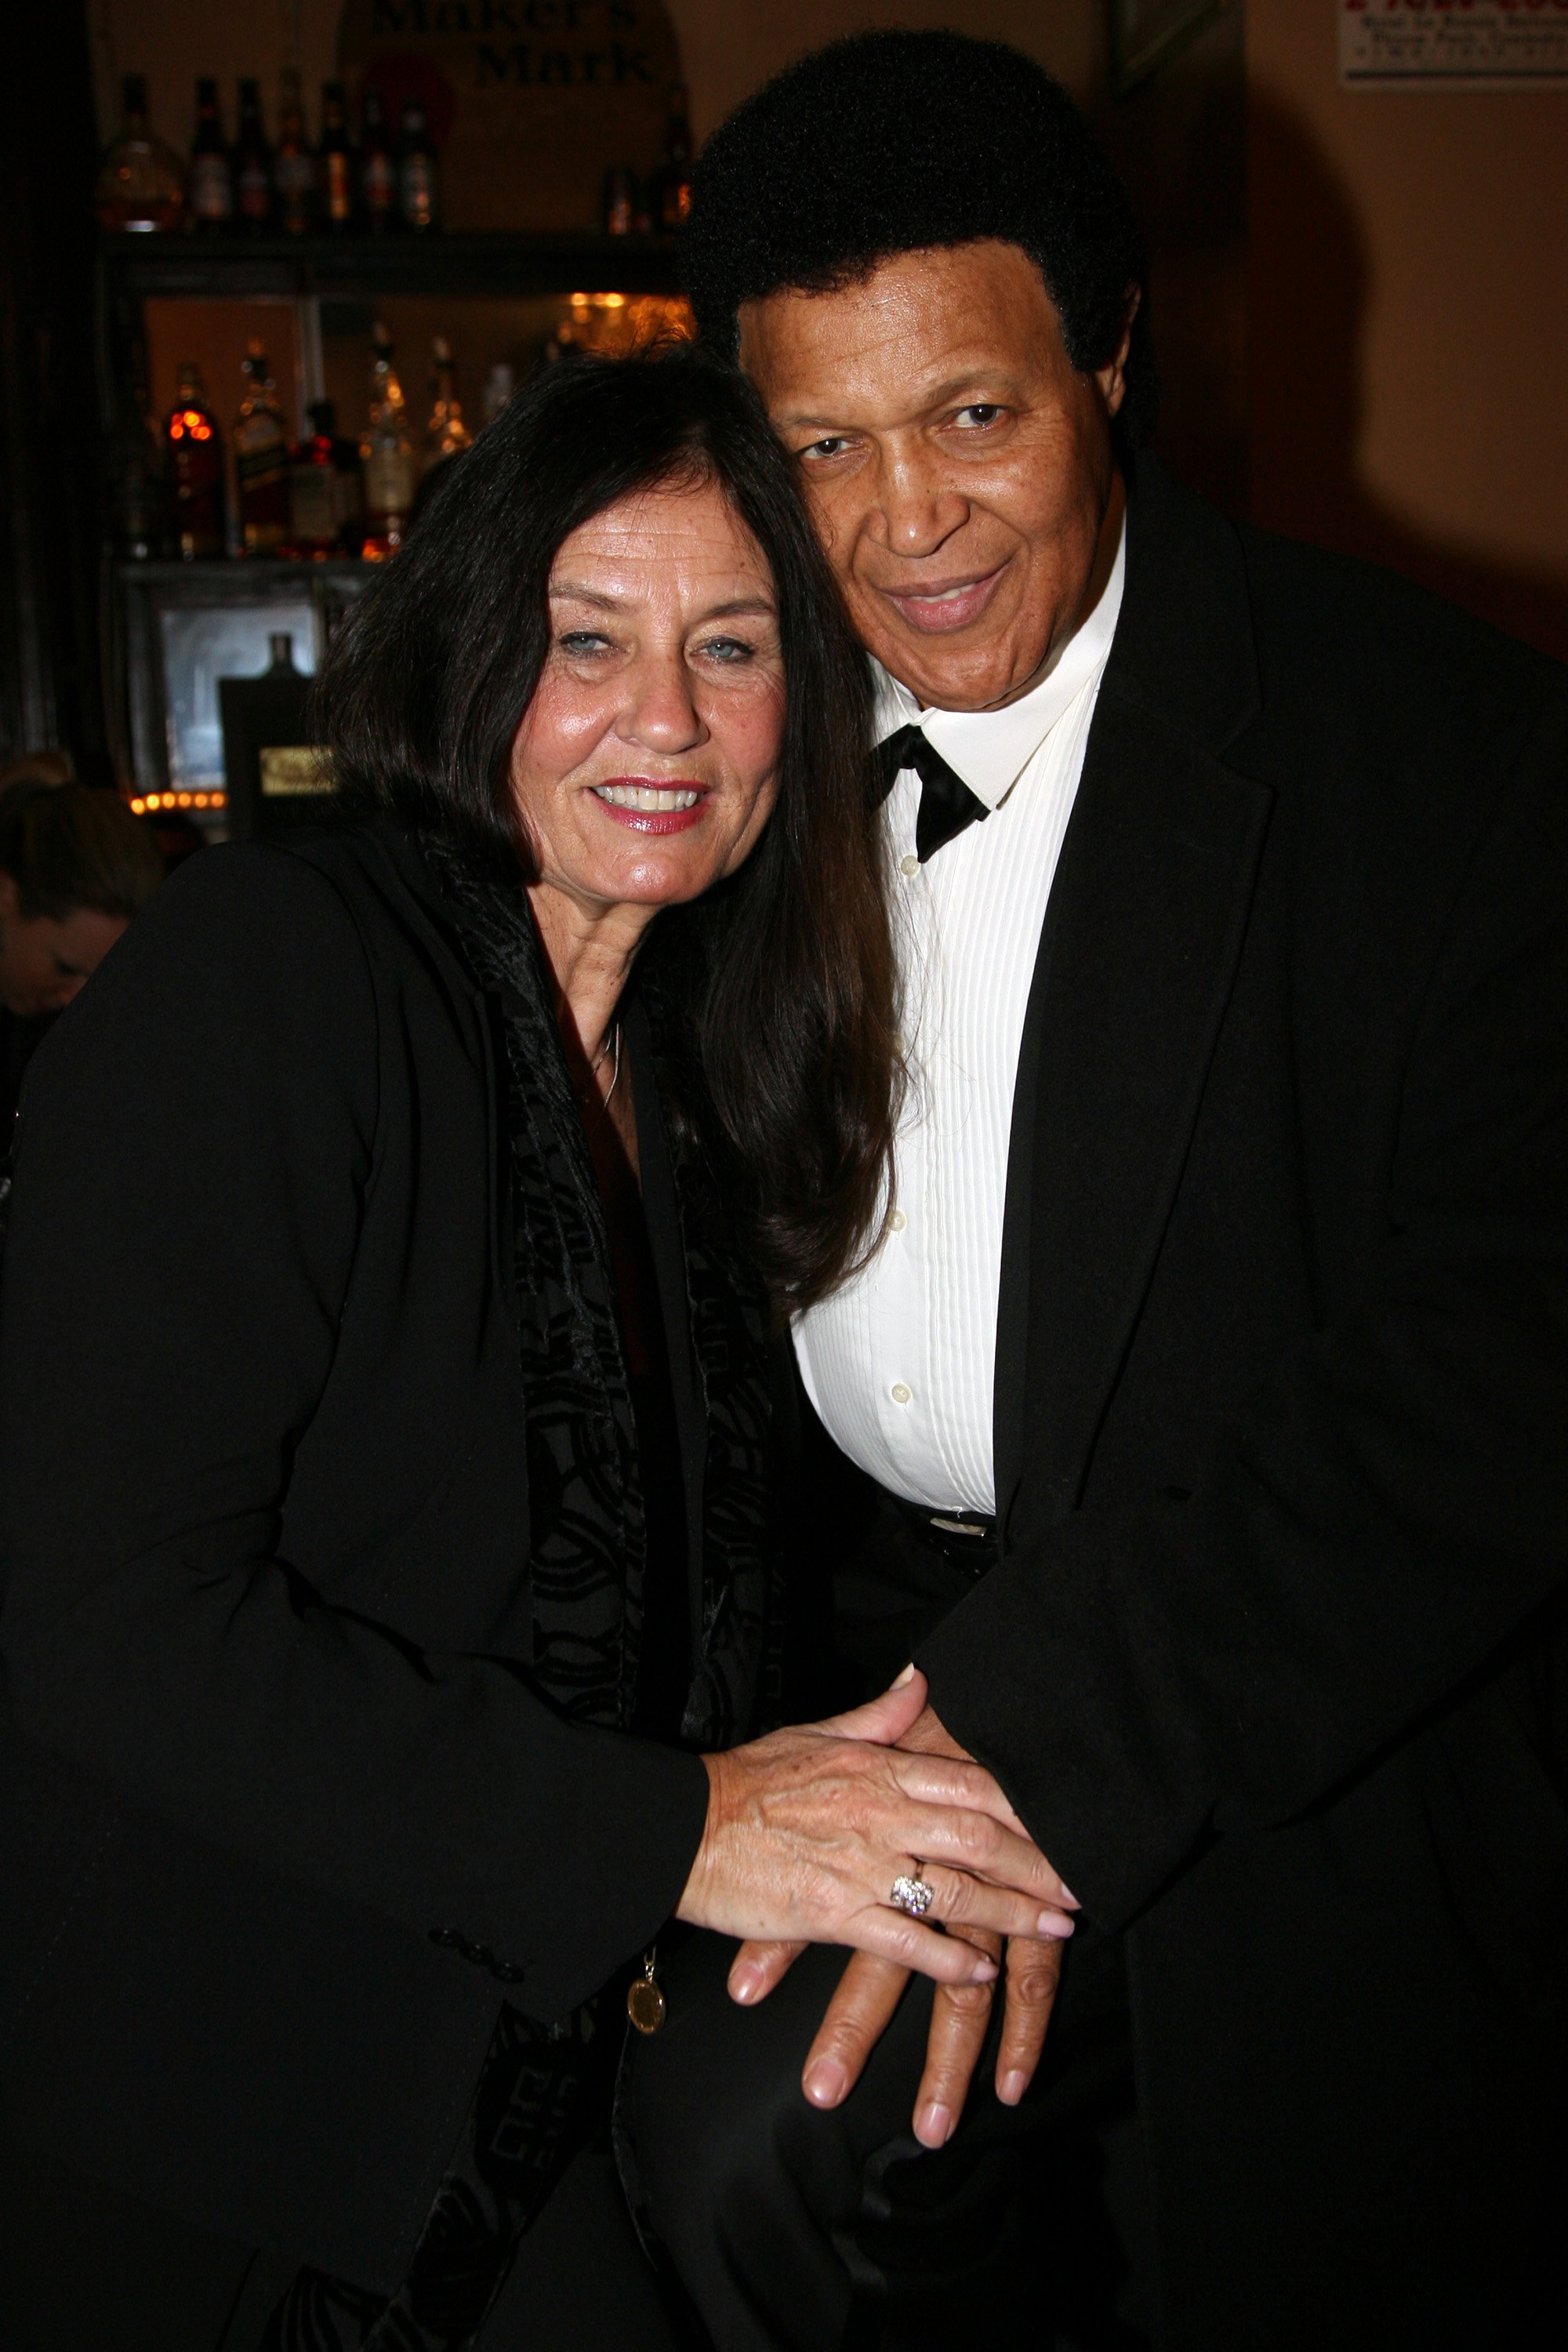 Chubby Checker in a photo with his wife, Catharina Lodders at The Cutting Room New York on March 6, 2008. | Photo: Getty Images